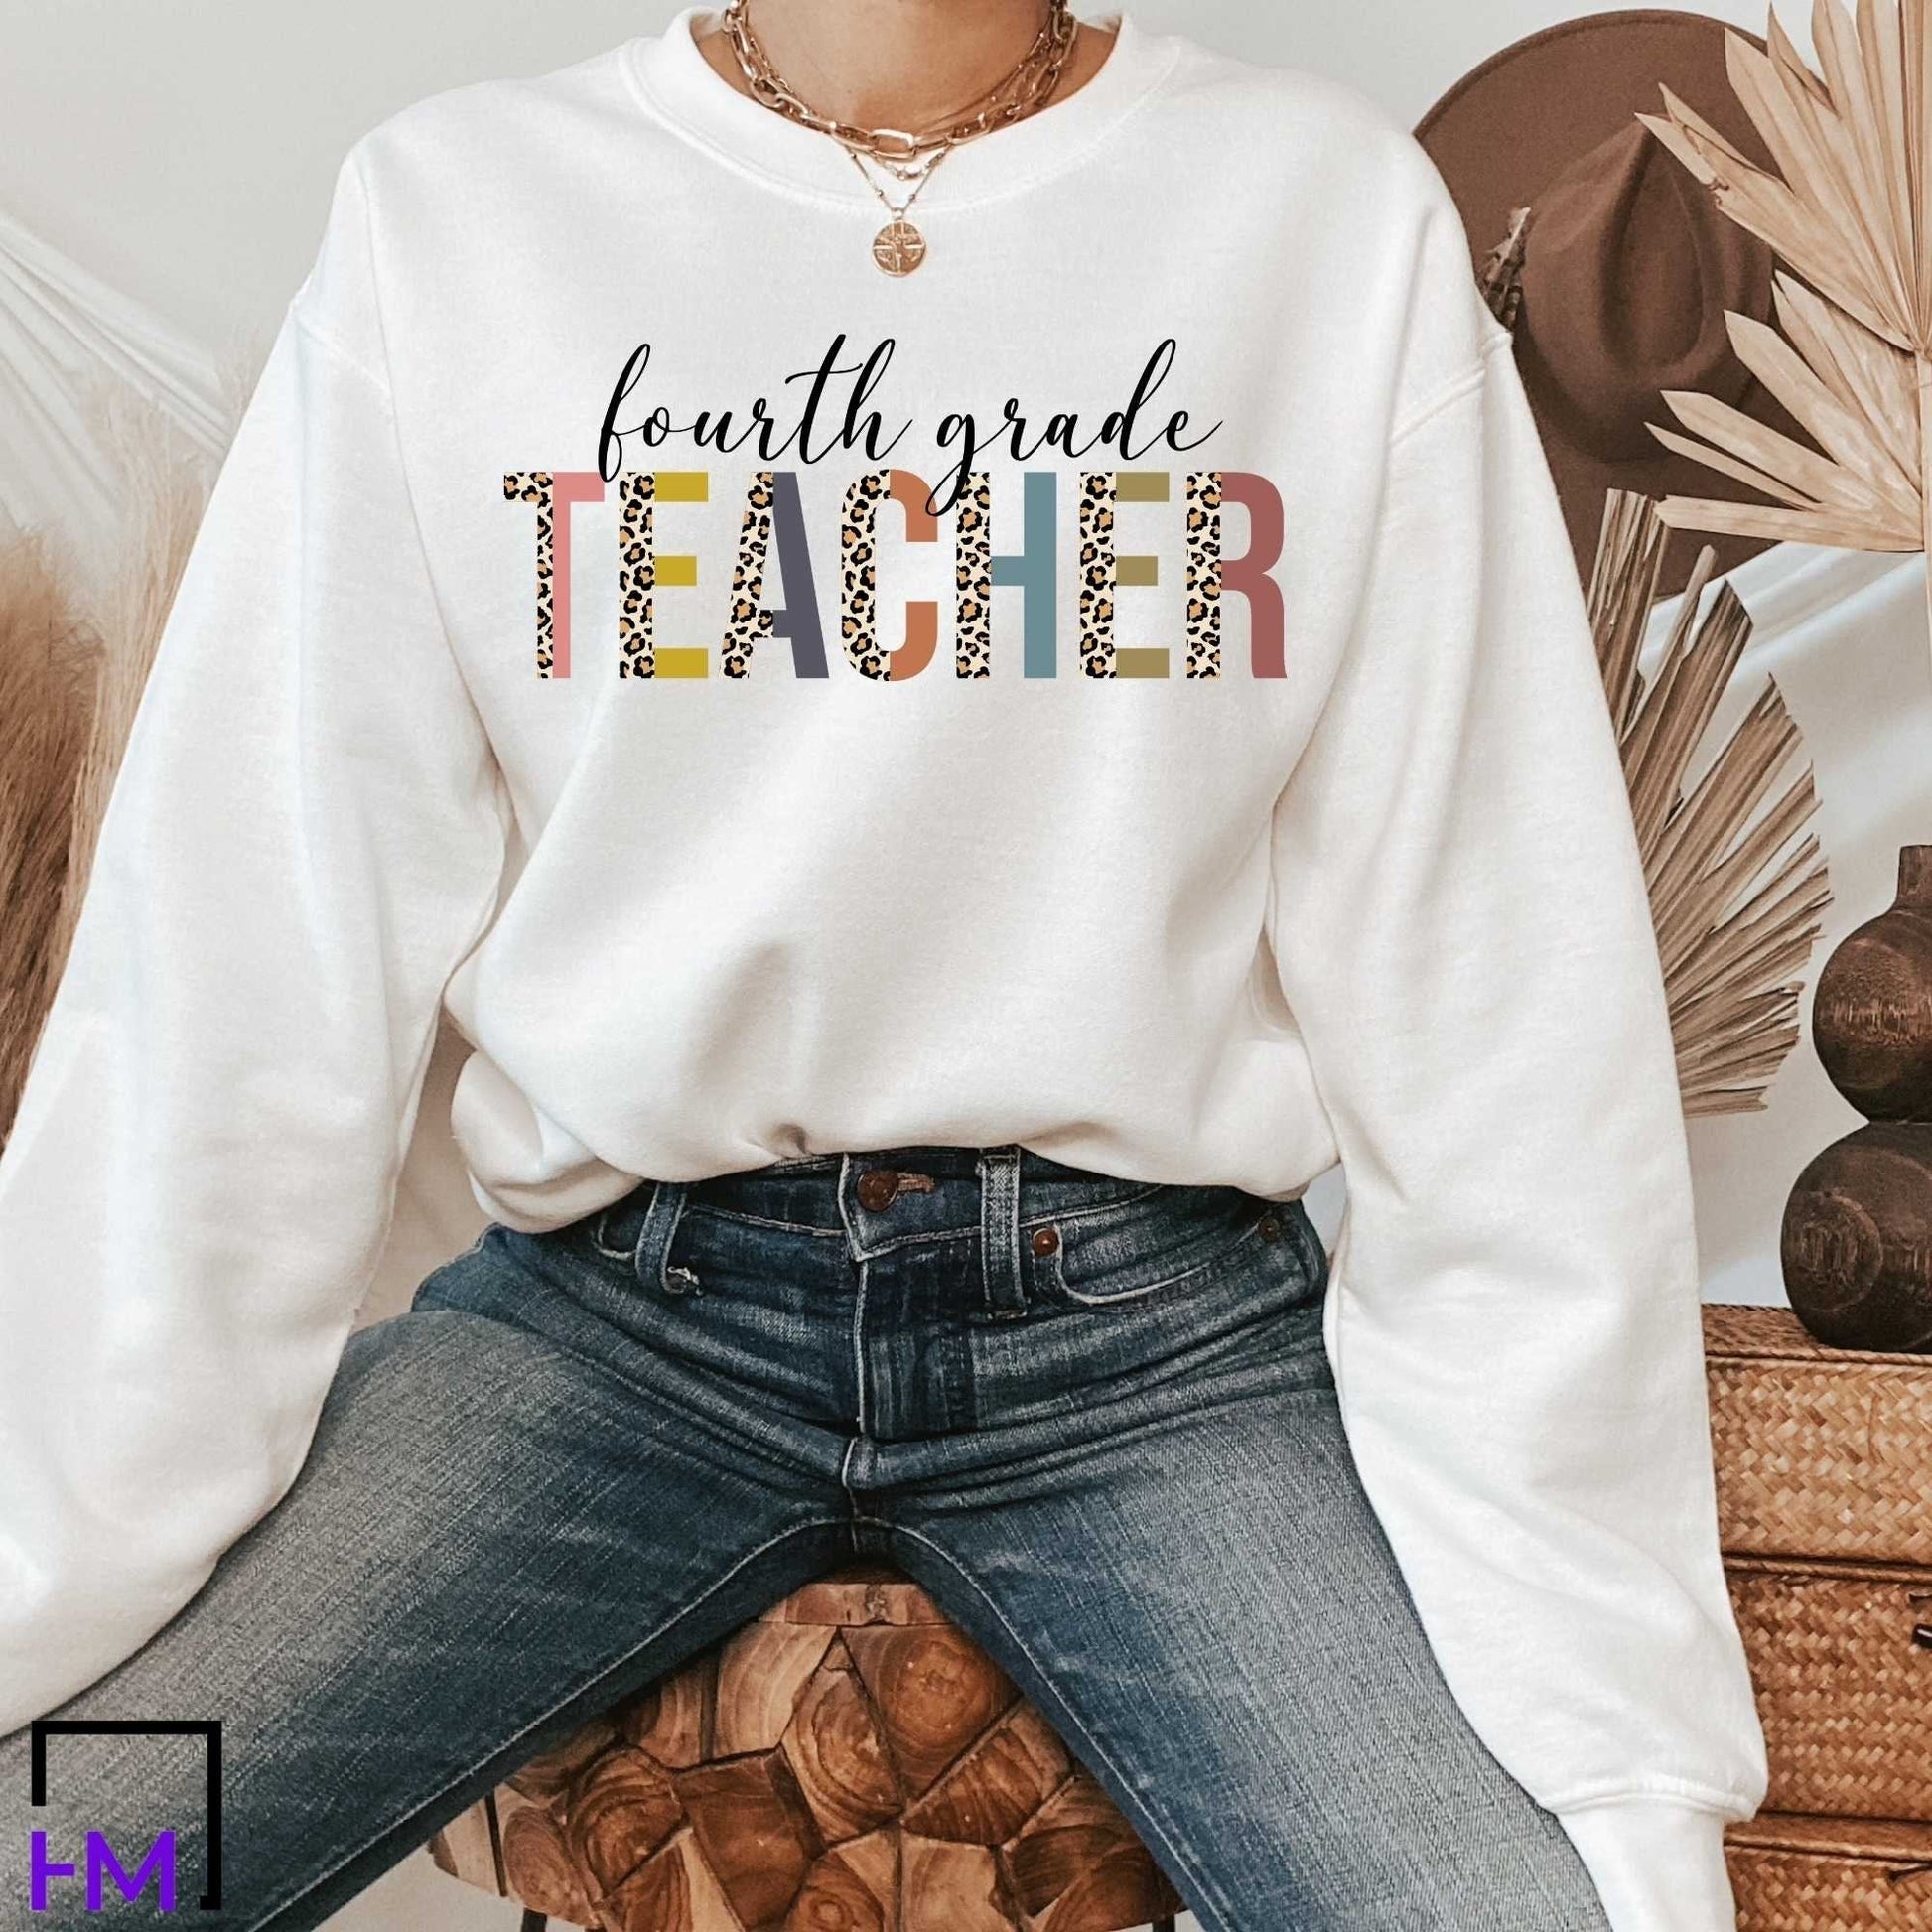 4th Grade Teacher Shirt | Great for New Middle School Team, Appreciation Gifts, Back to School, Holiday Celebration, Christmas Presents Gift HMDesignStudioUS